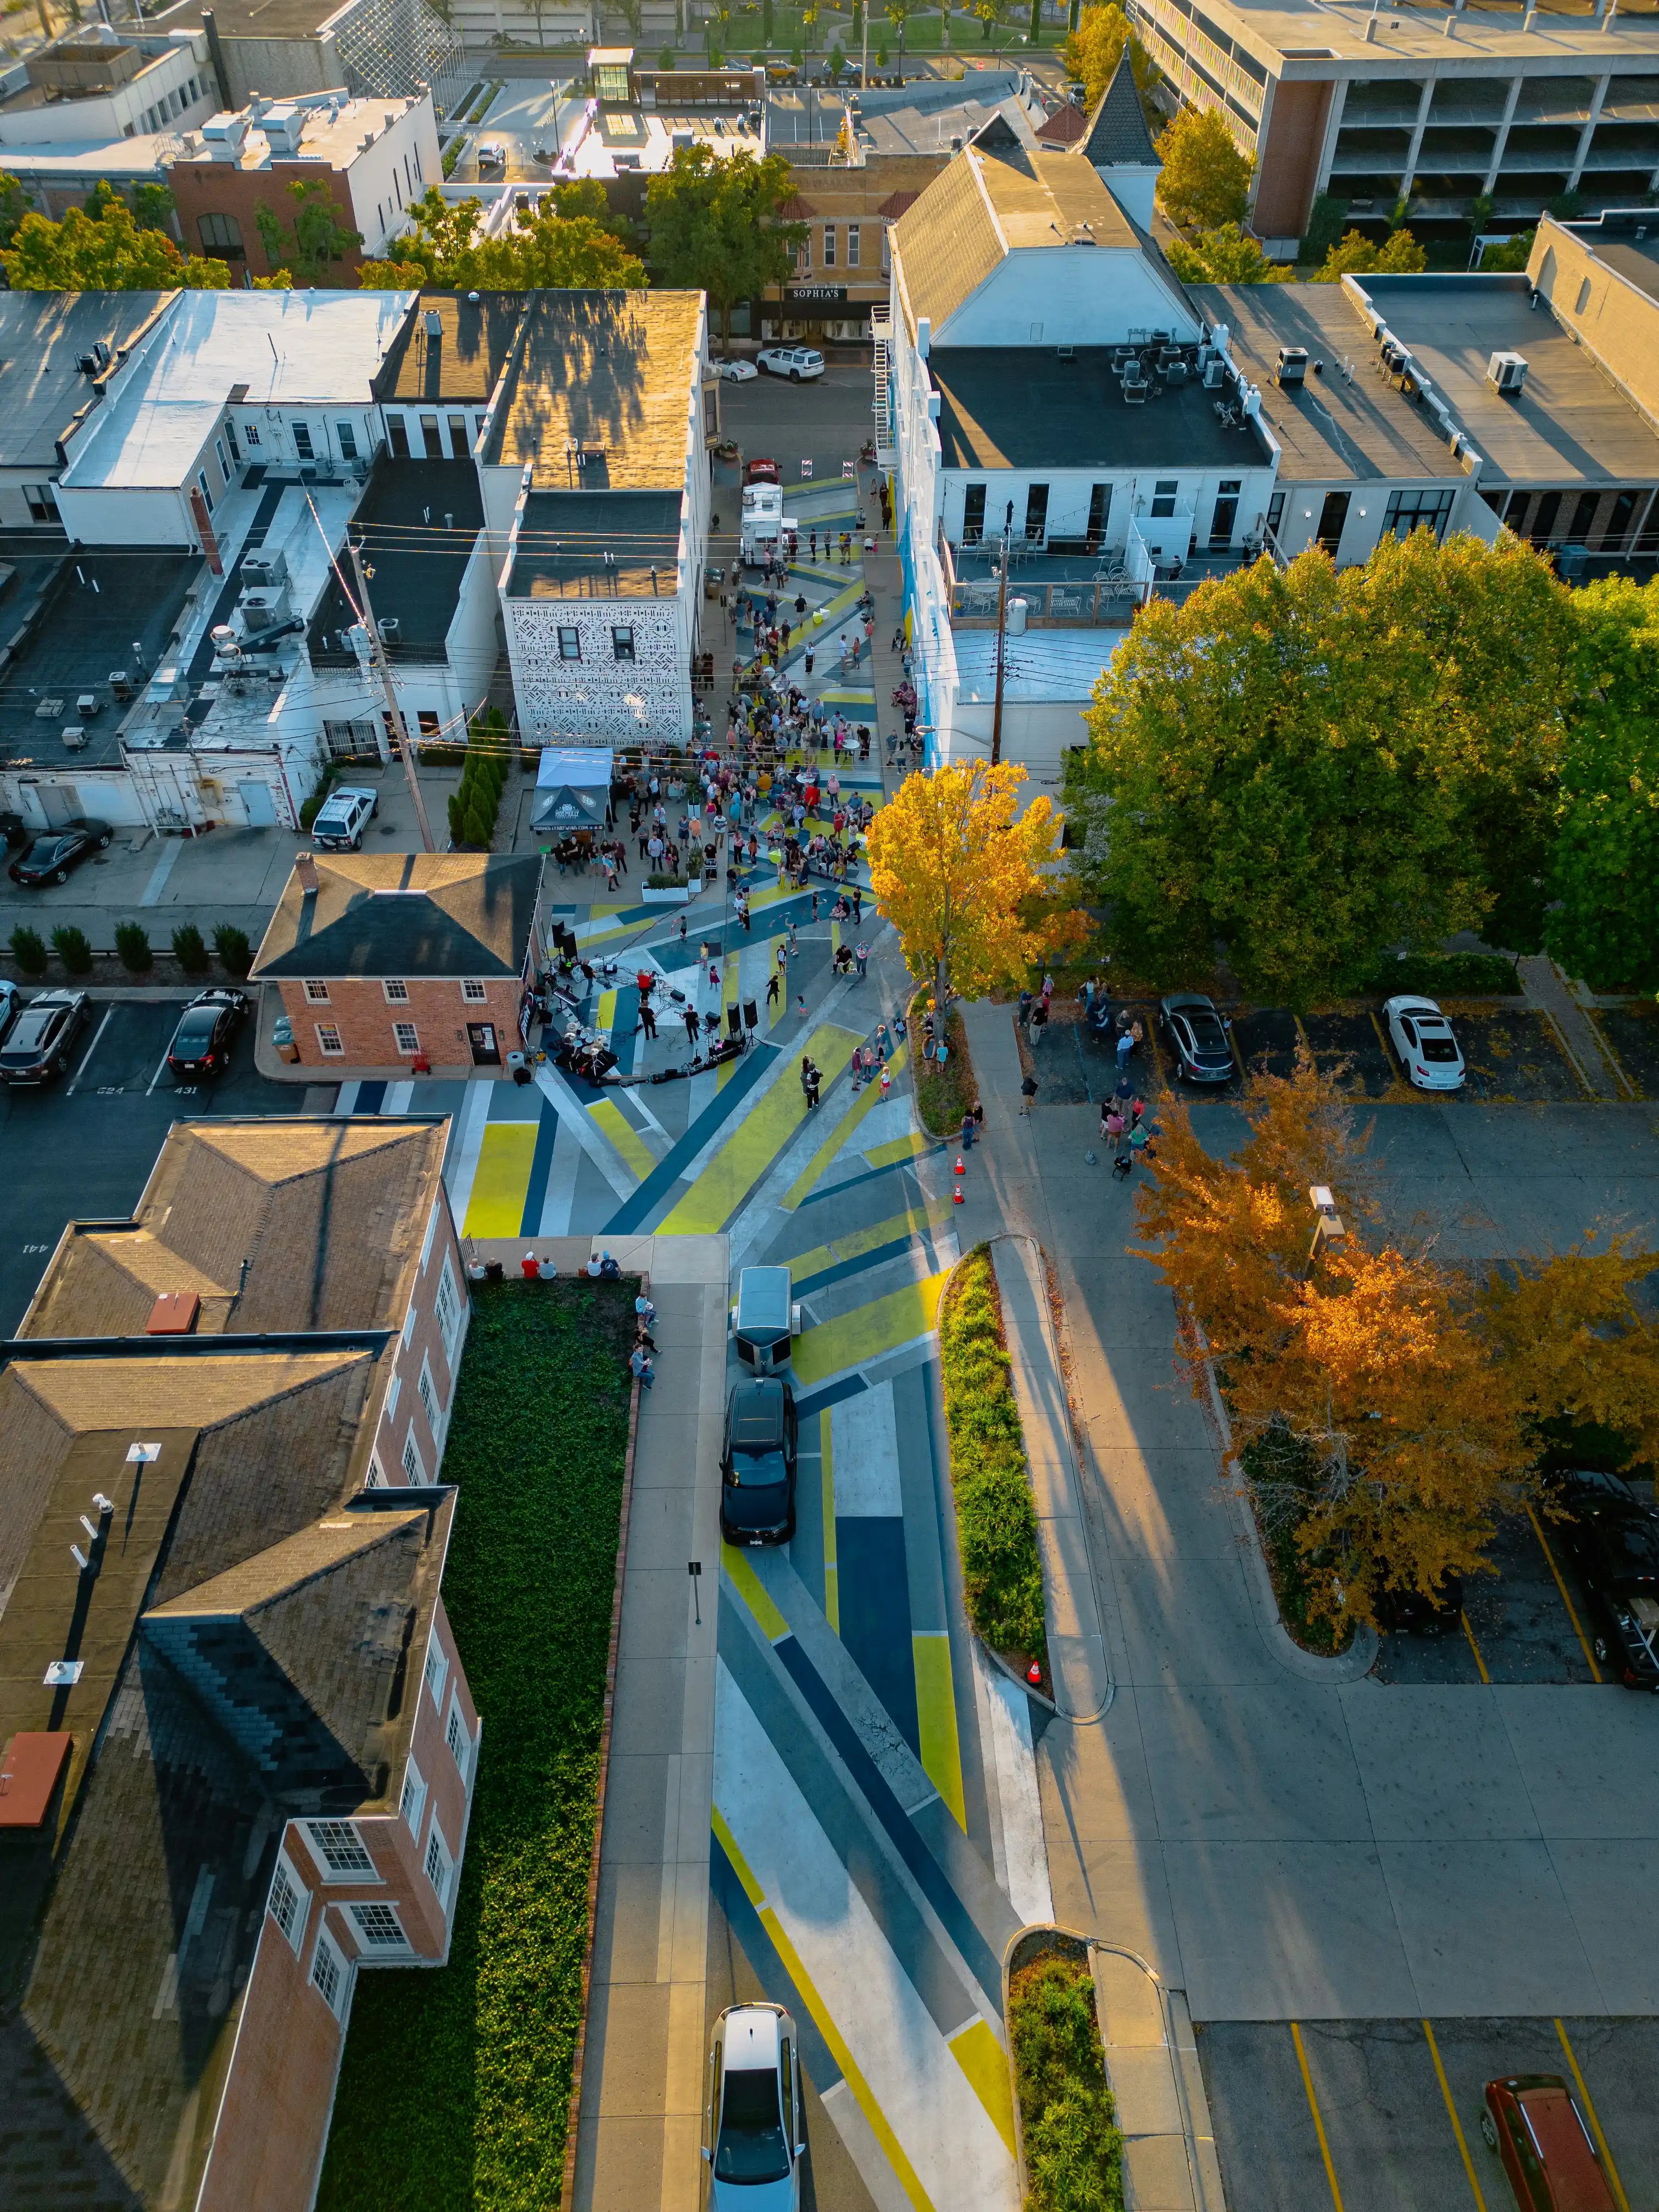 Aerial view of a busy city street intersection with cars, pedestrians, and autumn-colored trees during early evening.